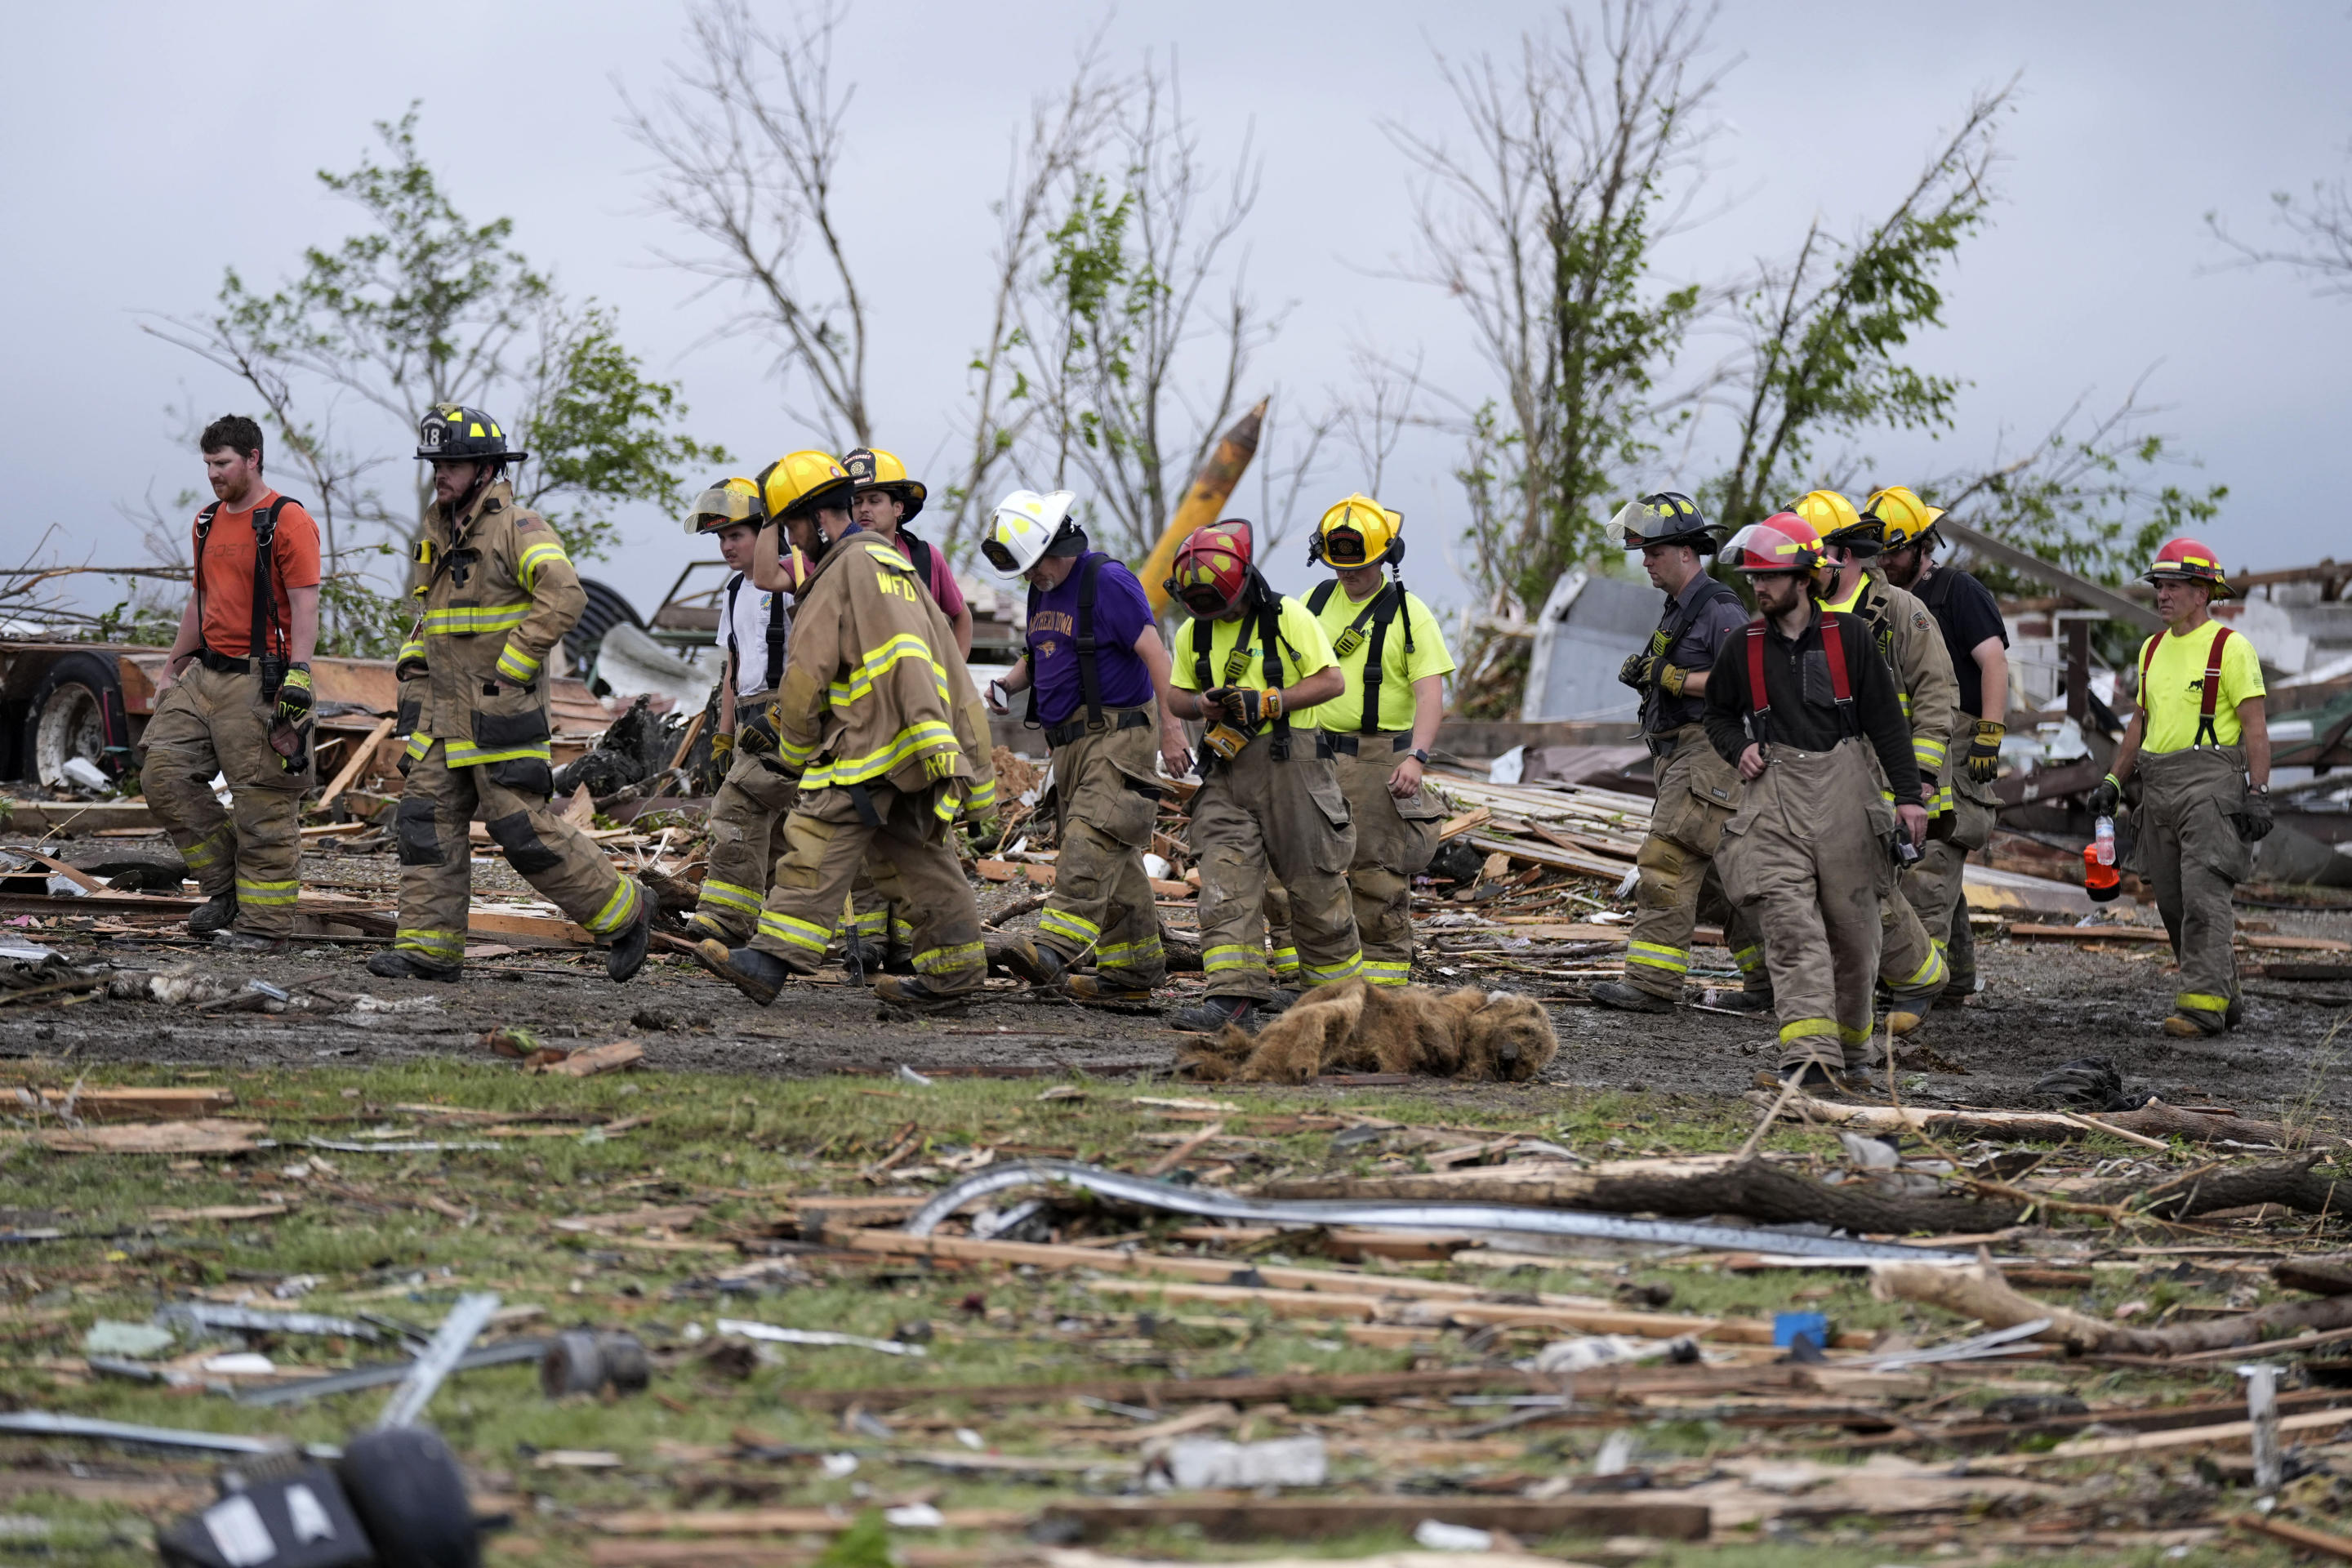 Firefighters walks among tornado-damaged homes on Tuesday in Greenfield, Iowa.